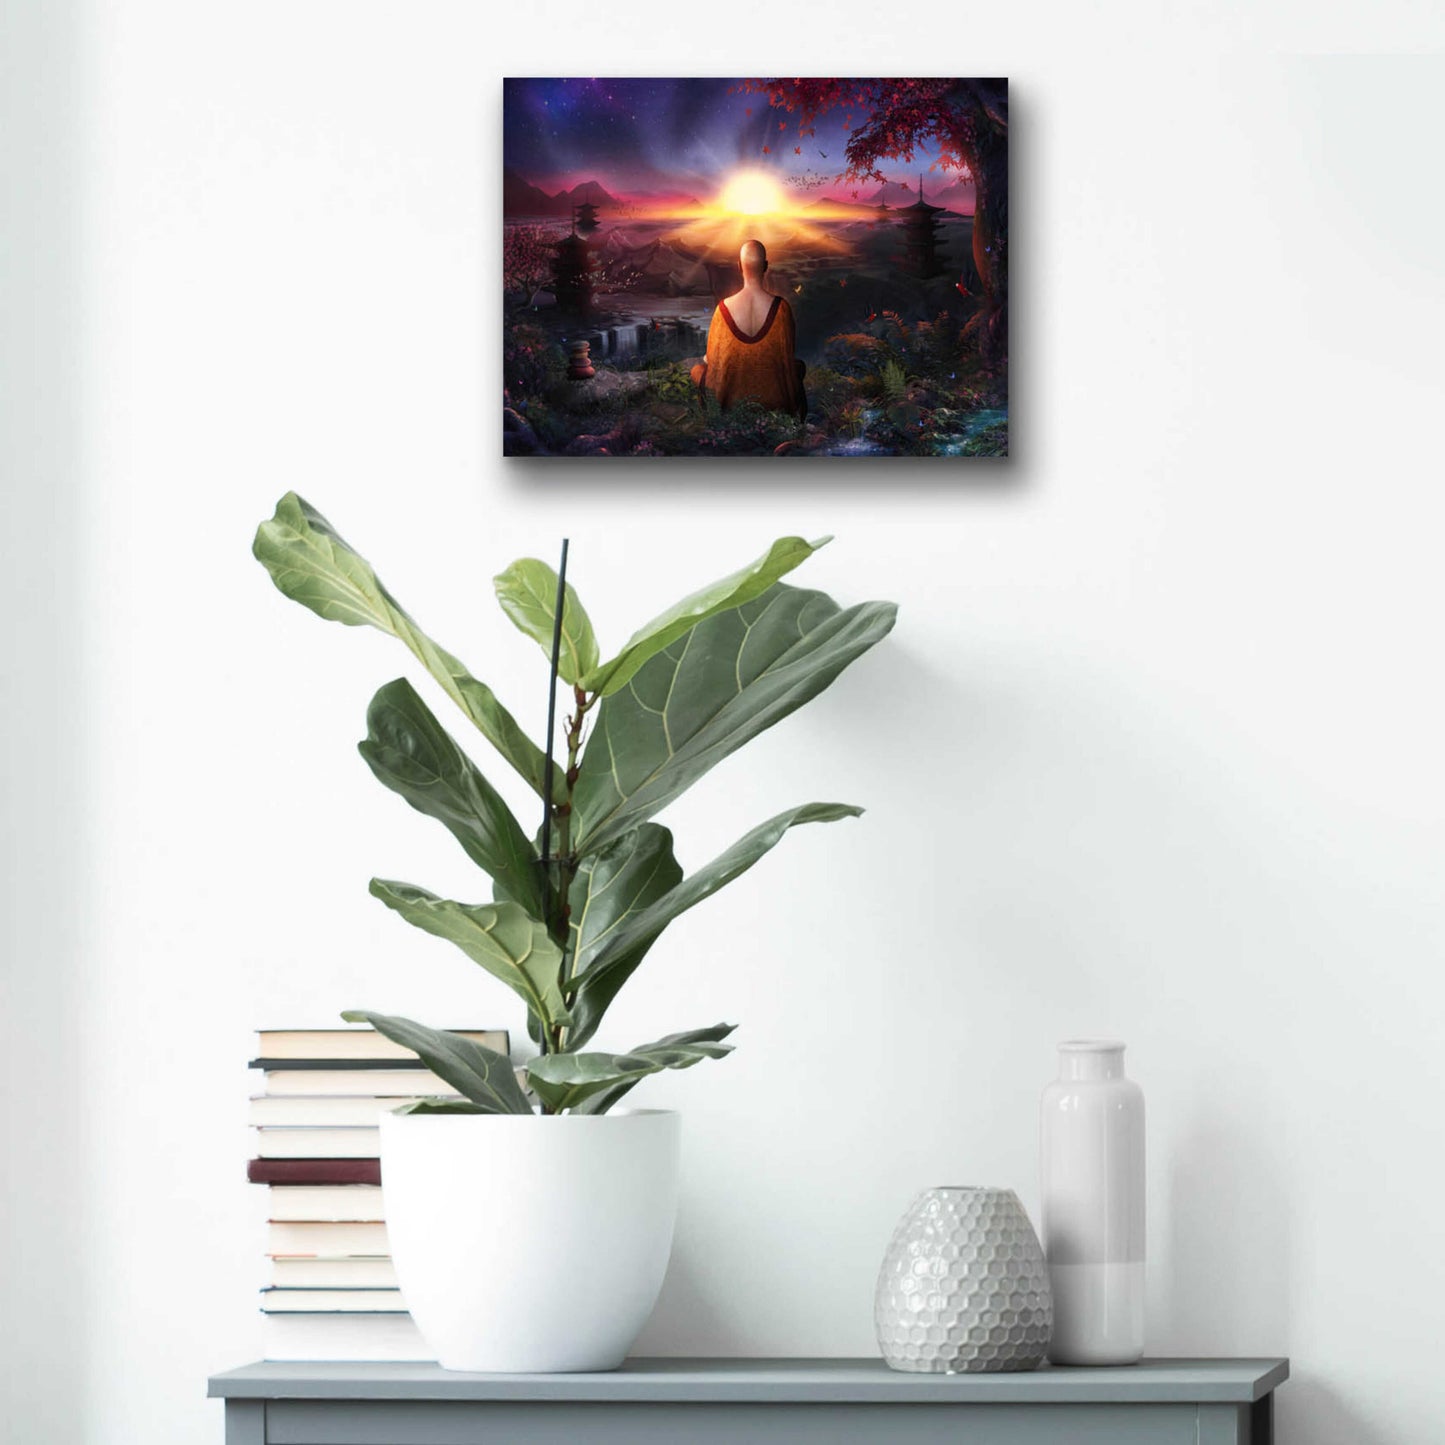 Epic Art 'A Magical Existence' by Cameron Gray, Acrylic Glass Wall Art,16x12